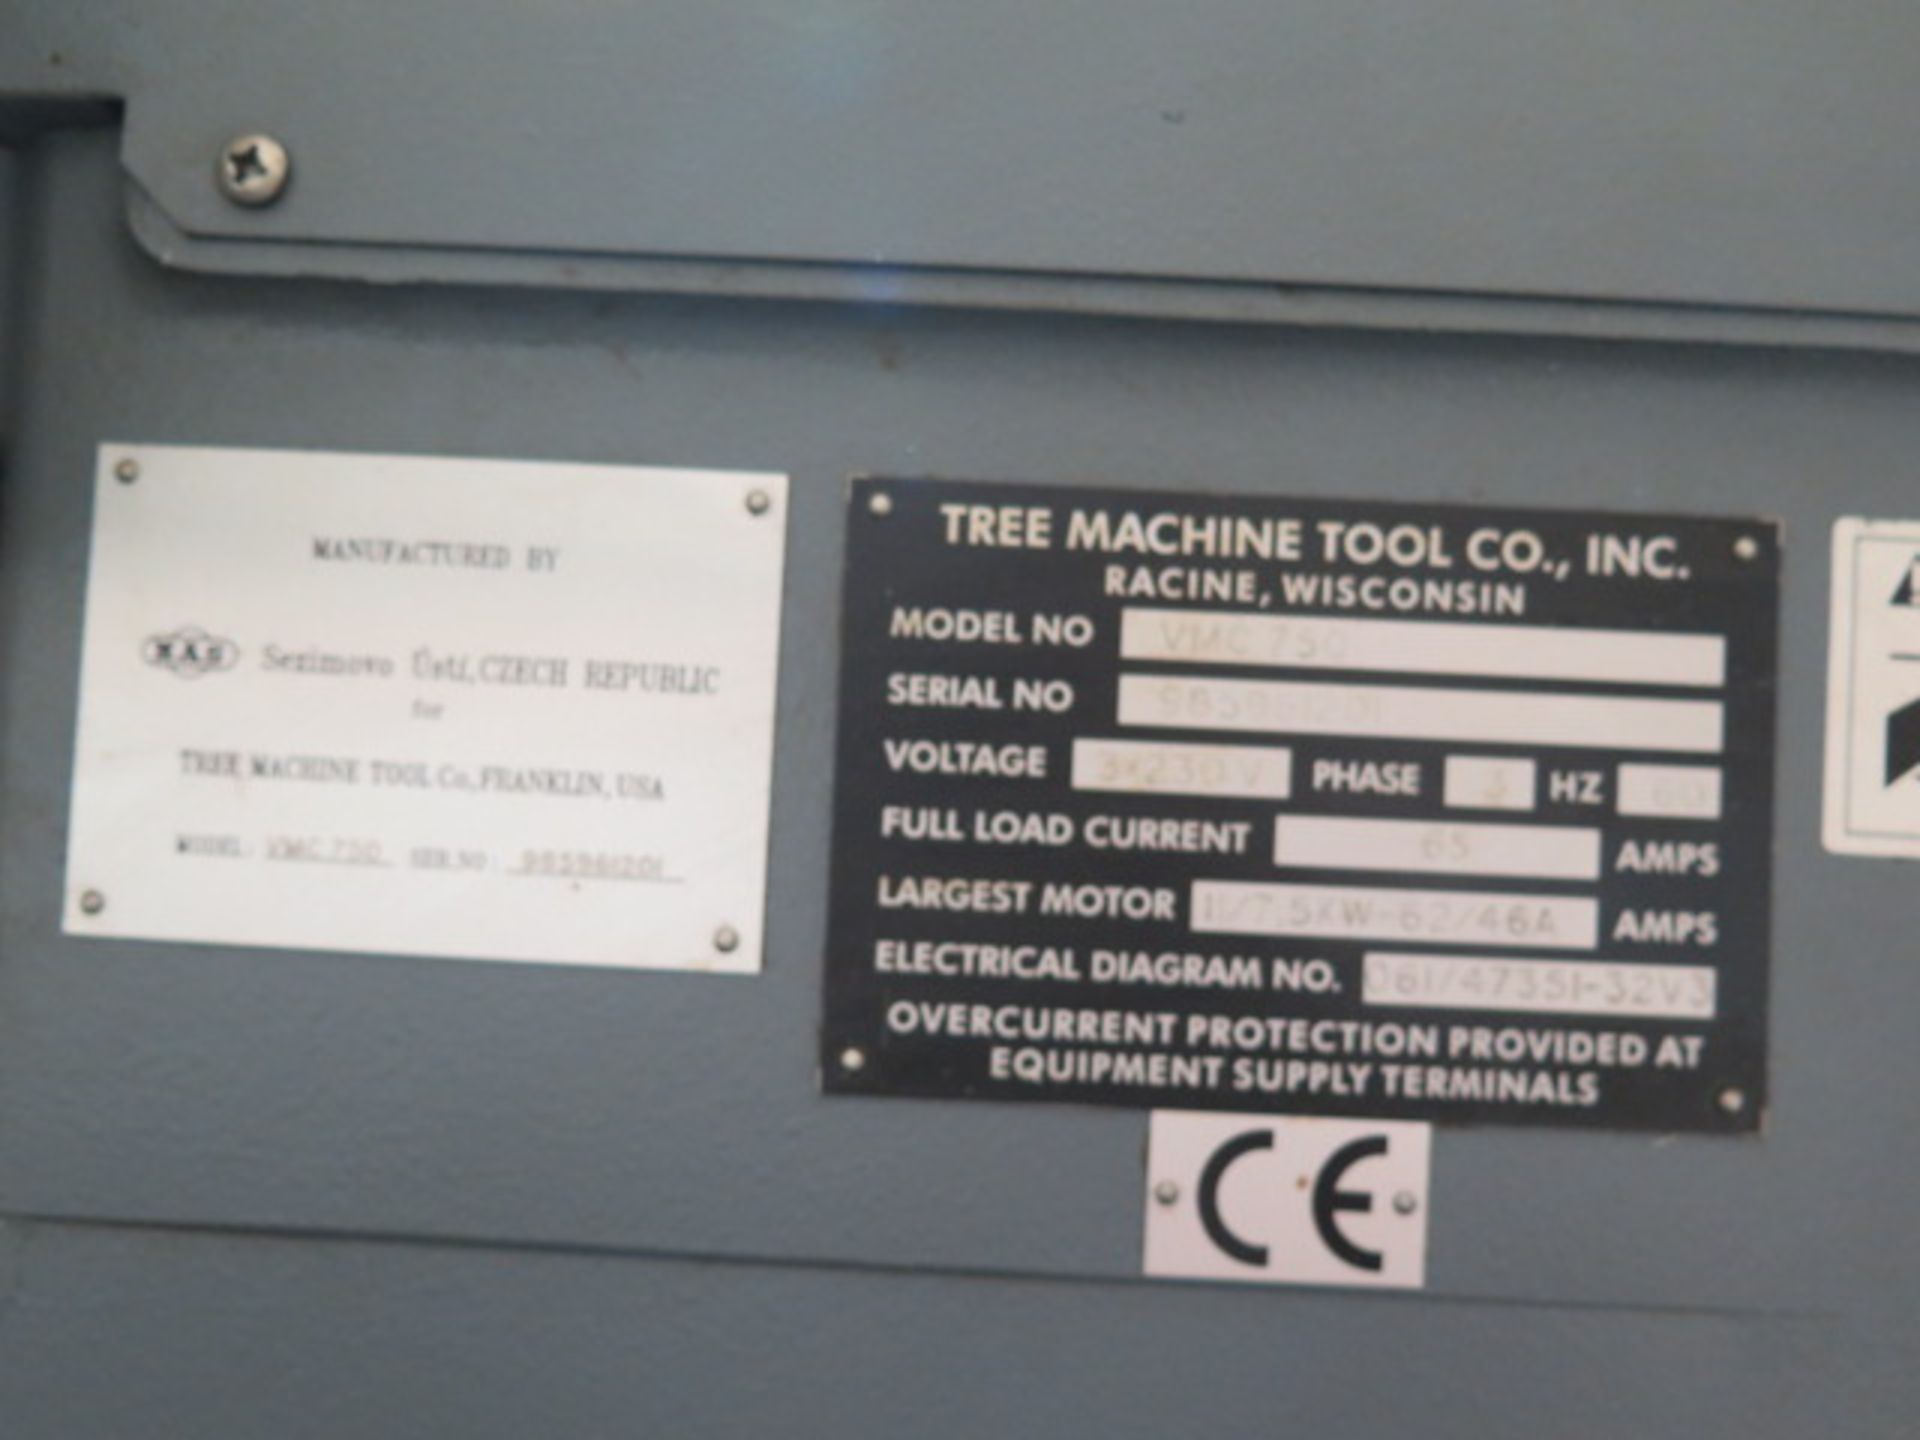 Tree / MAS VMC750 CNC Vertical Machining Center s/n 985961201 w/ Tree PC-2100 Controls, SOLD AS IS - Image 15 of 16